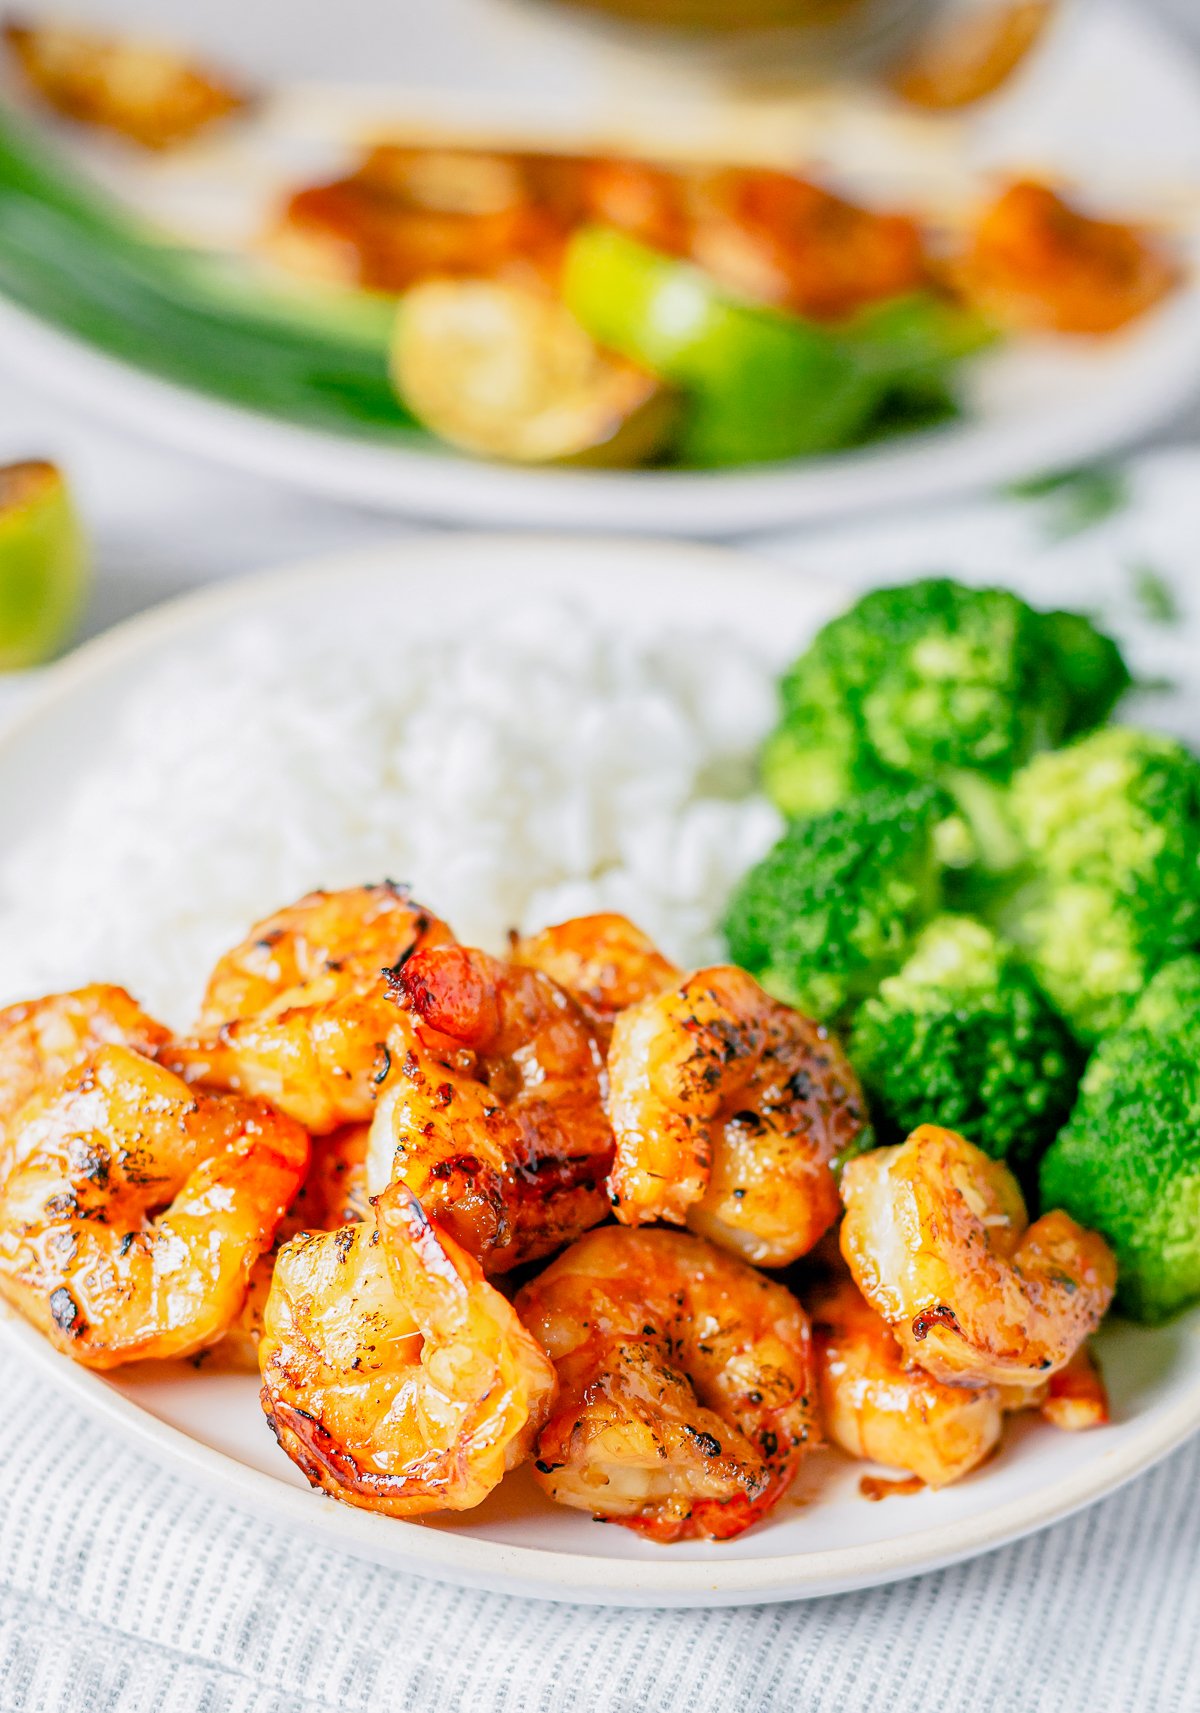 Shrimp off skewer on plate with rice and broccoli